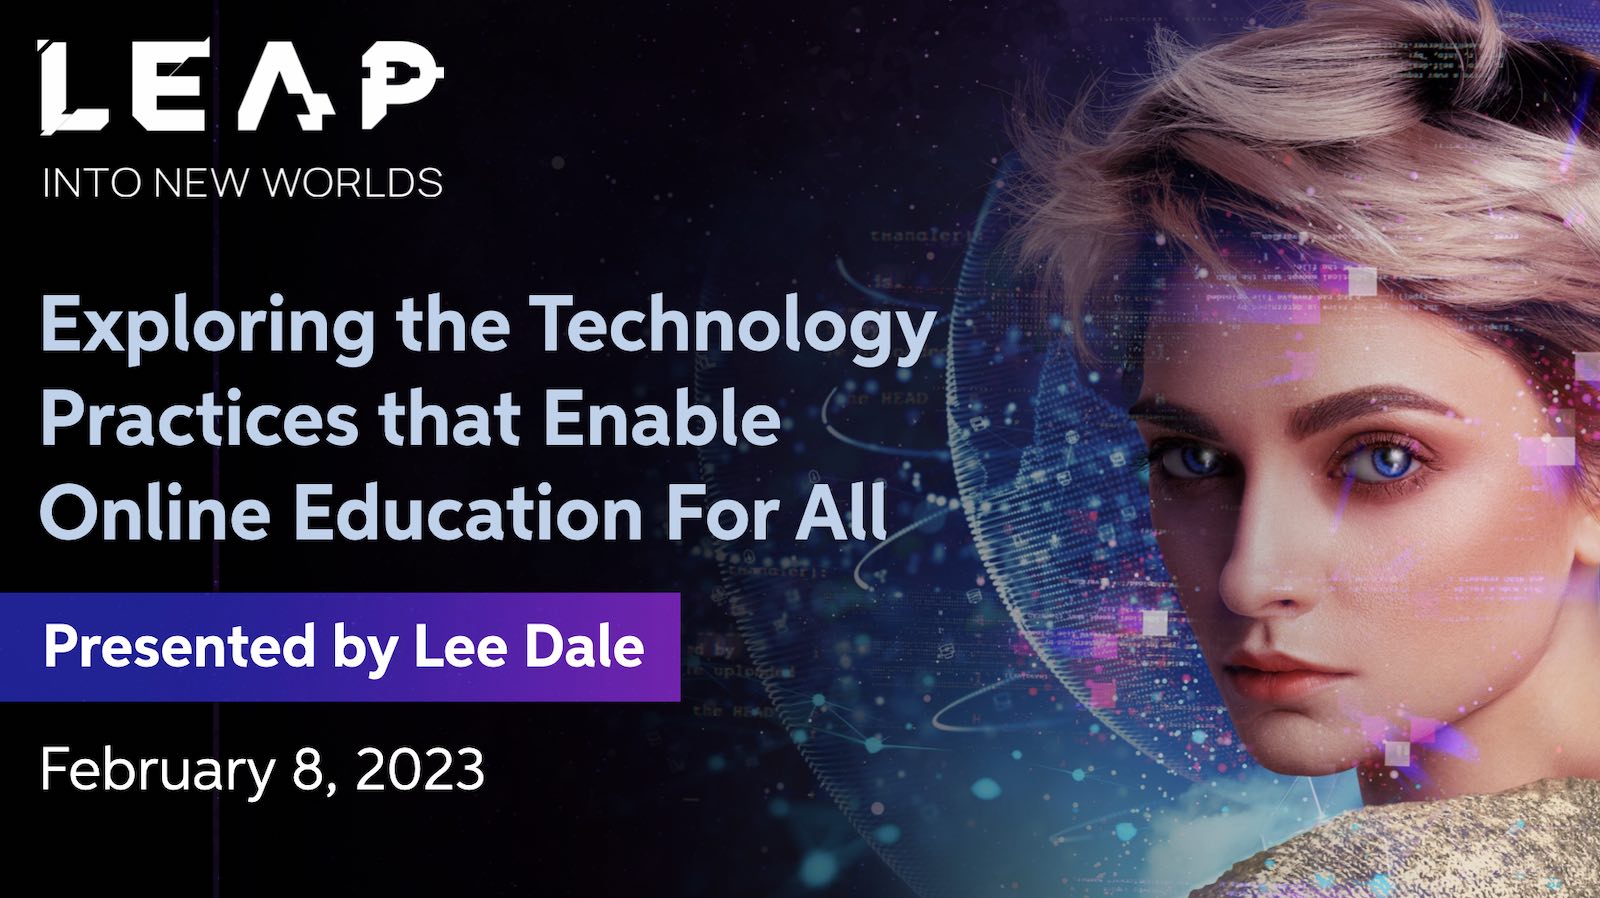 LEAP presentation invite card for Exploring the Technology Practices that Enable Online Education for All, February 9, 2023, by Lee Dale, CEO, Say Yeah!